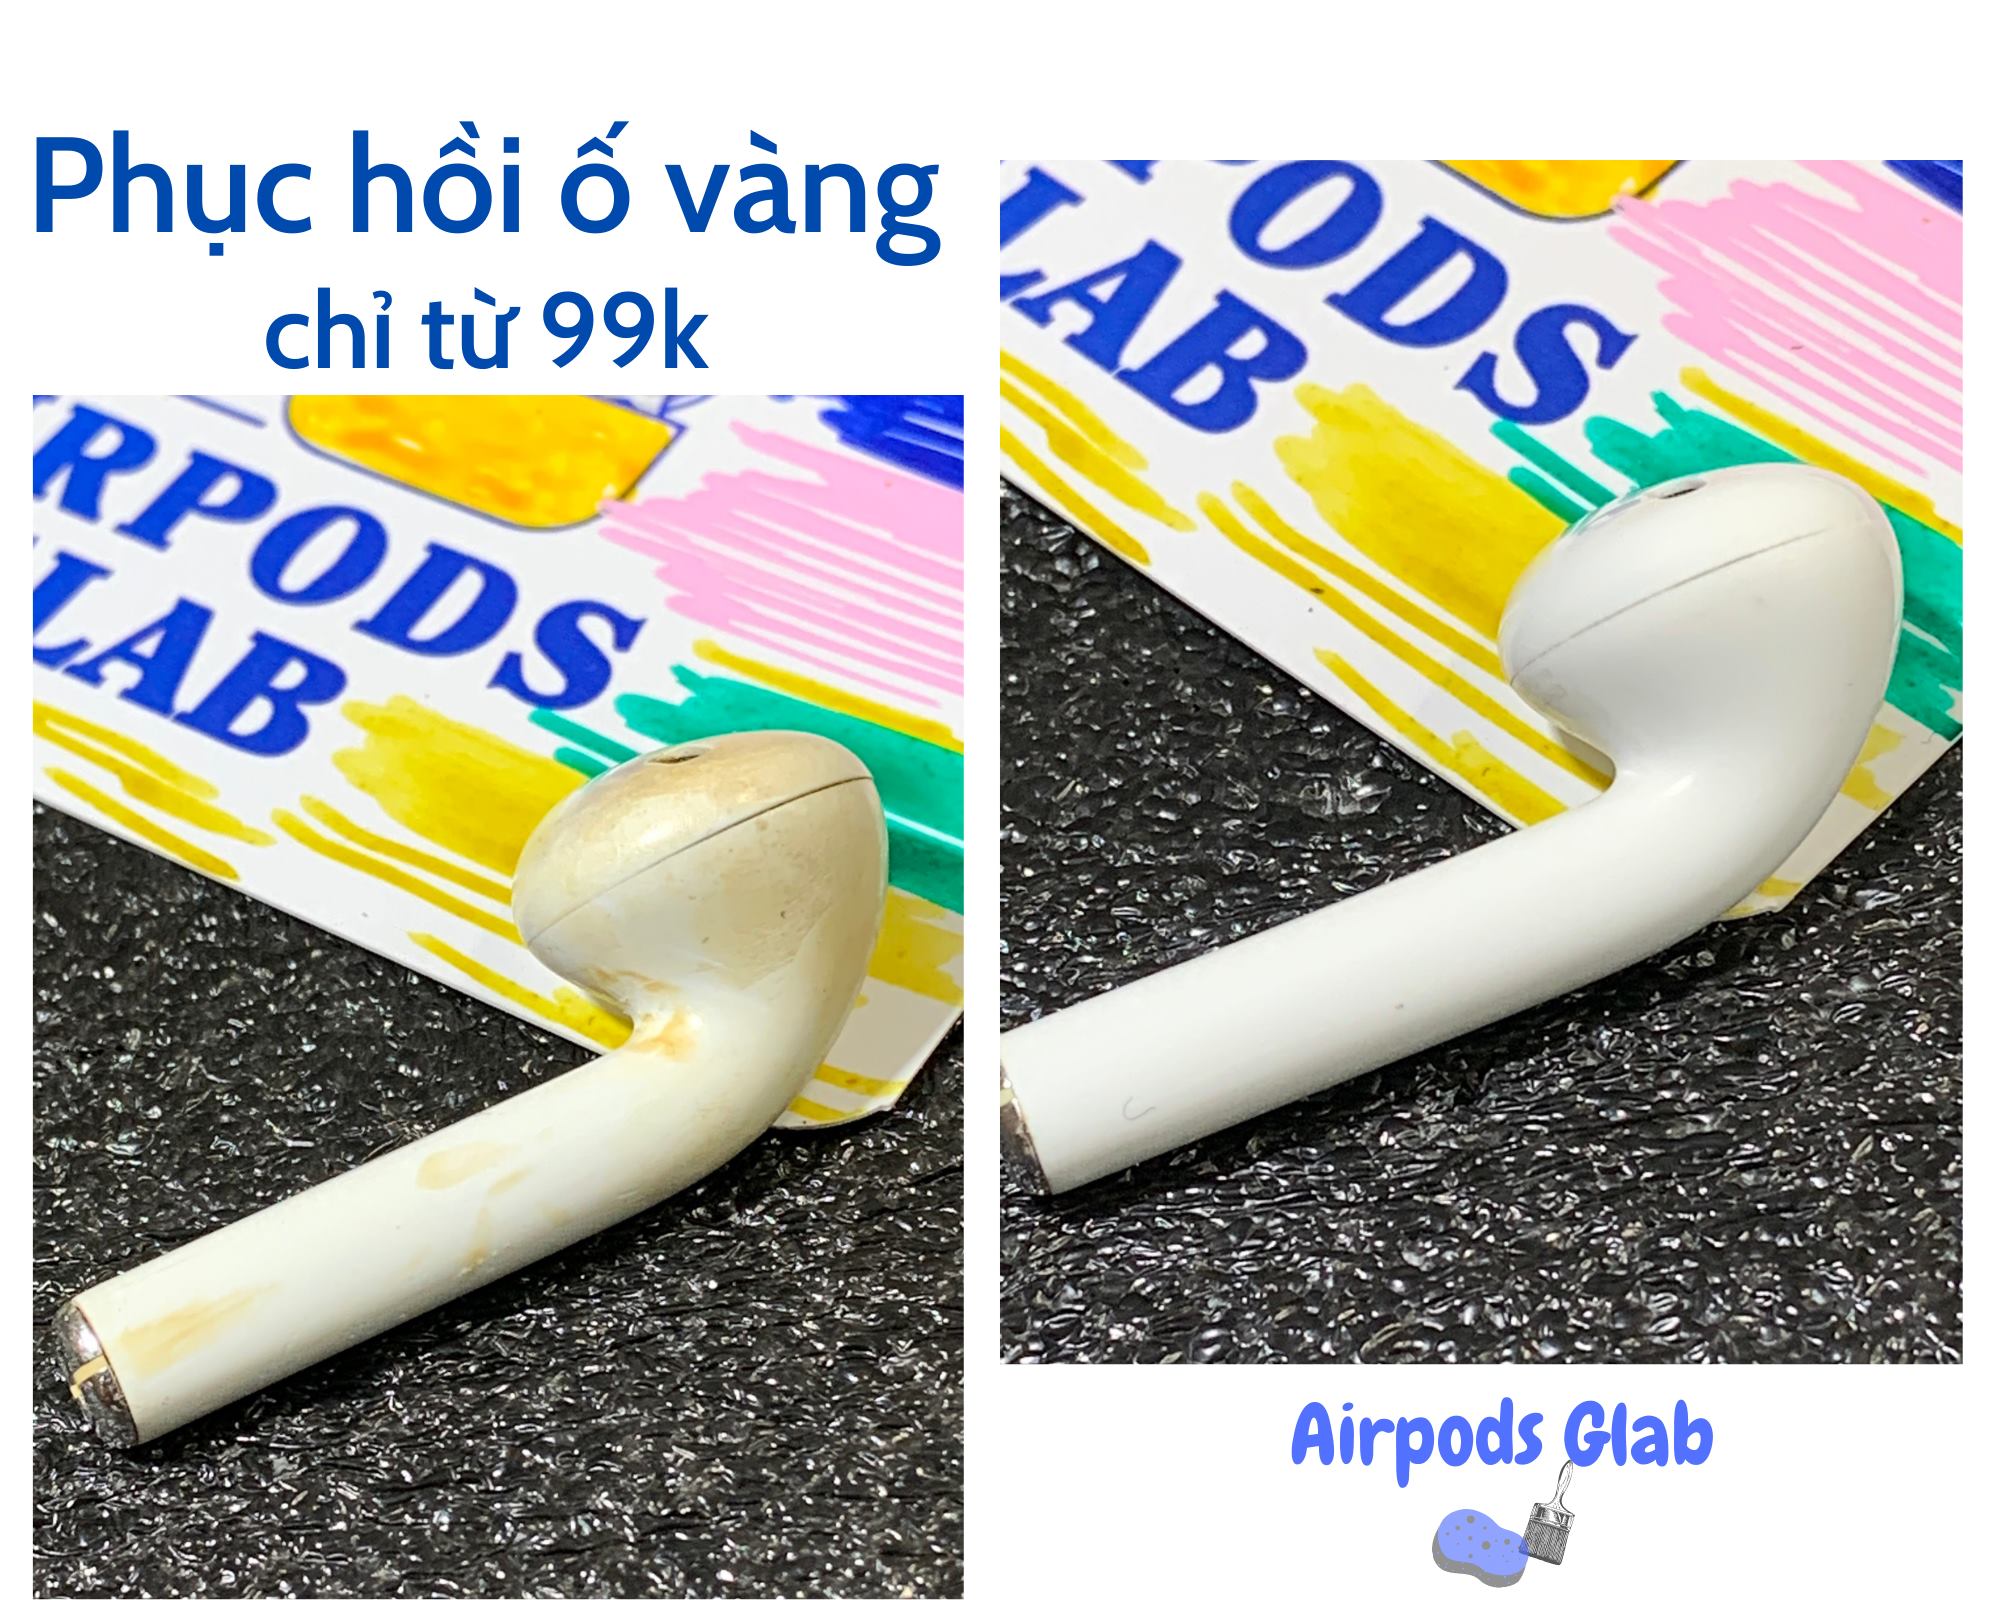 cach-ve-sinh-airpods-2